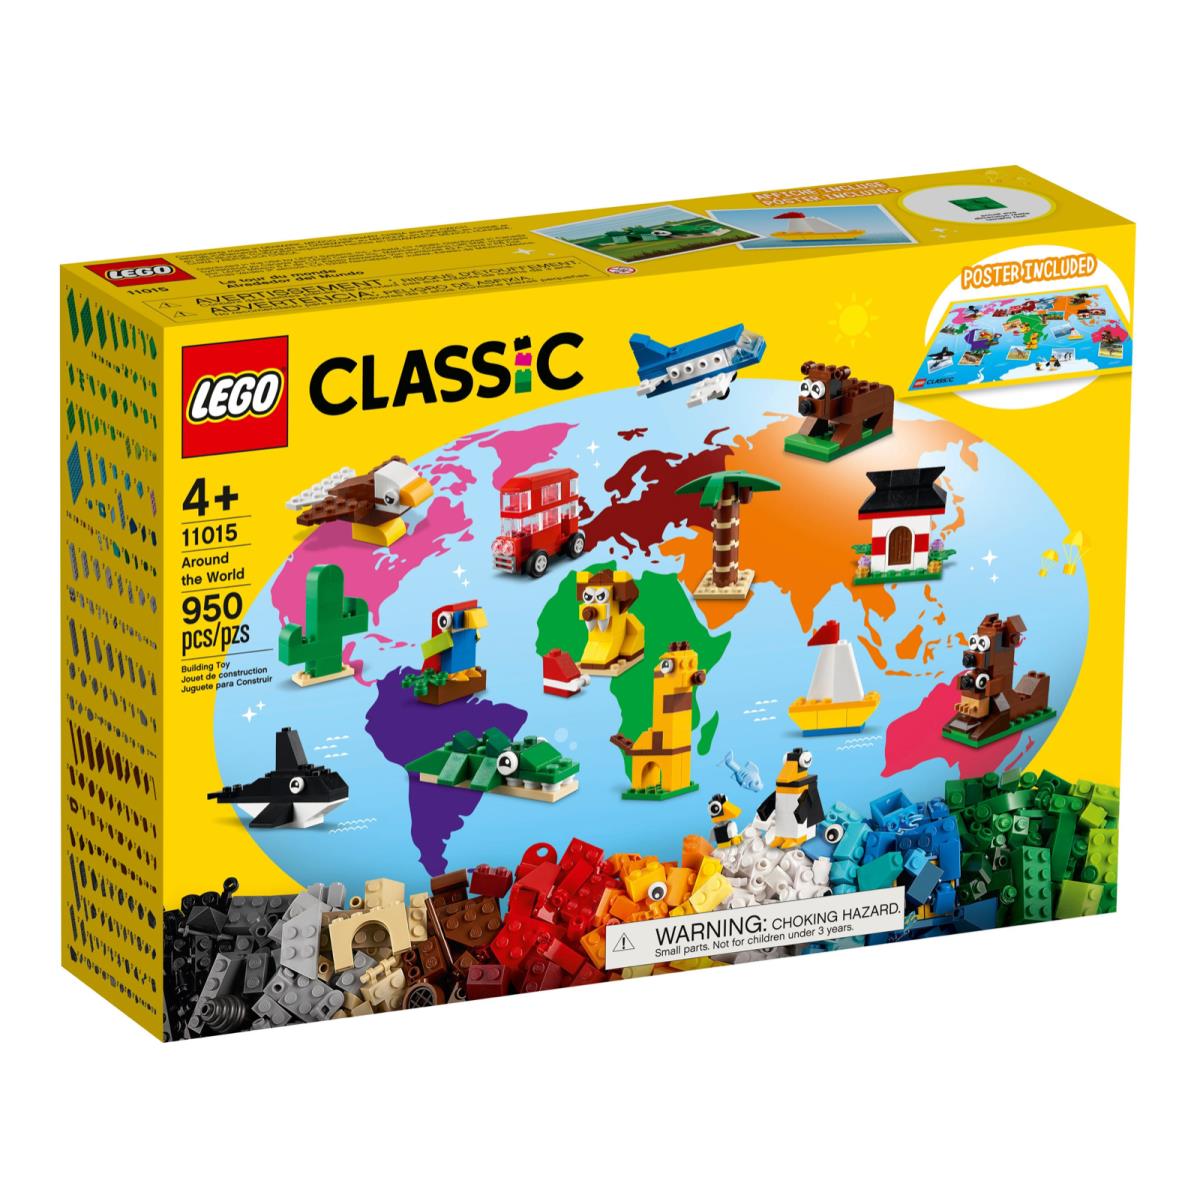 Lego Classic 11015 Around The World-950 Pieces -immediate Shipping